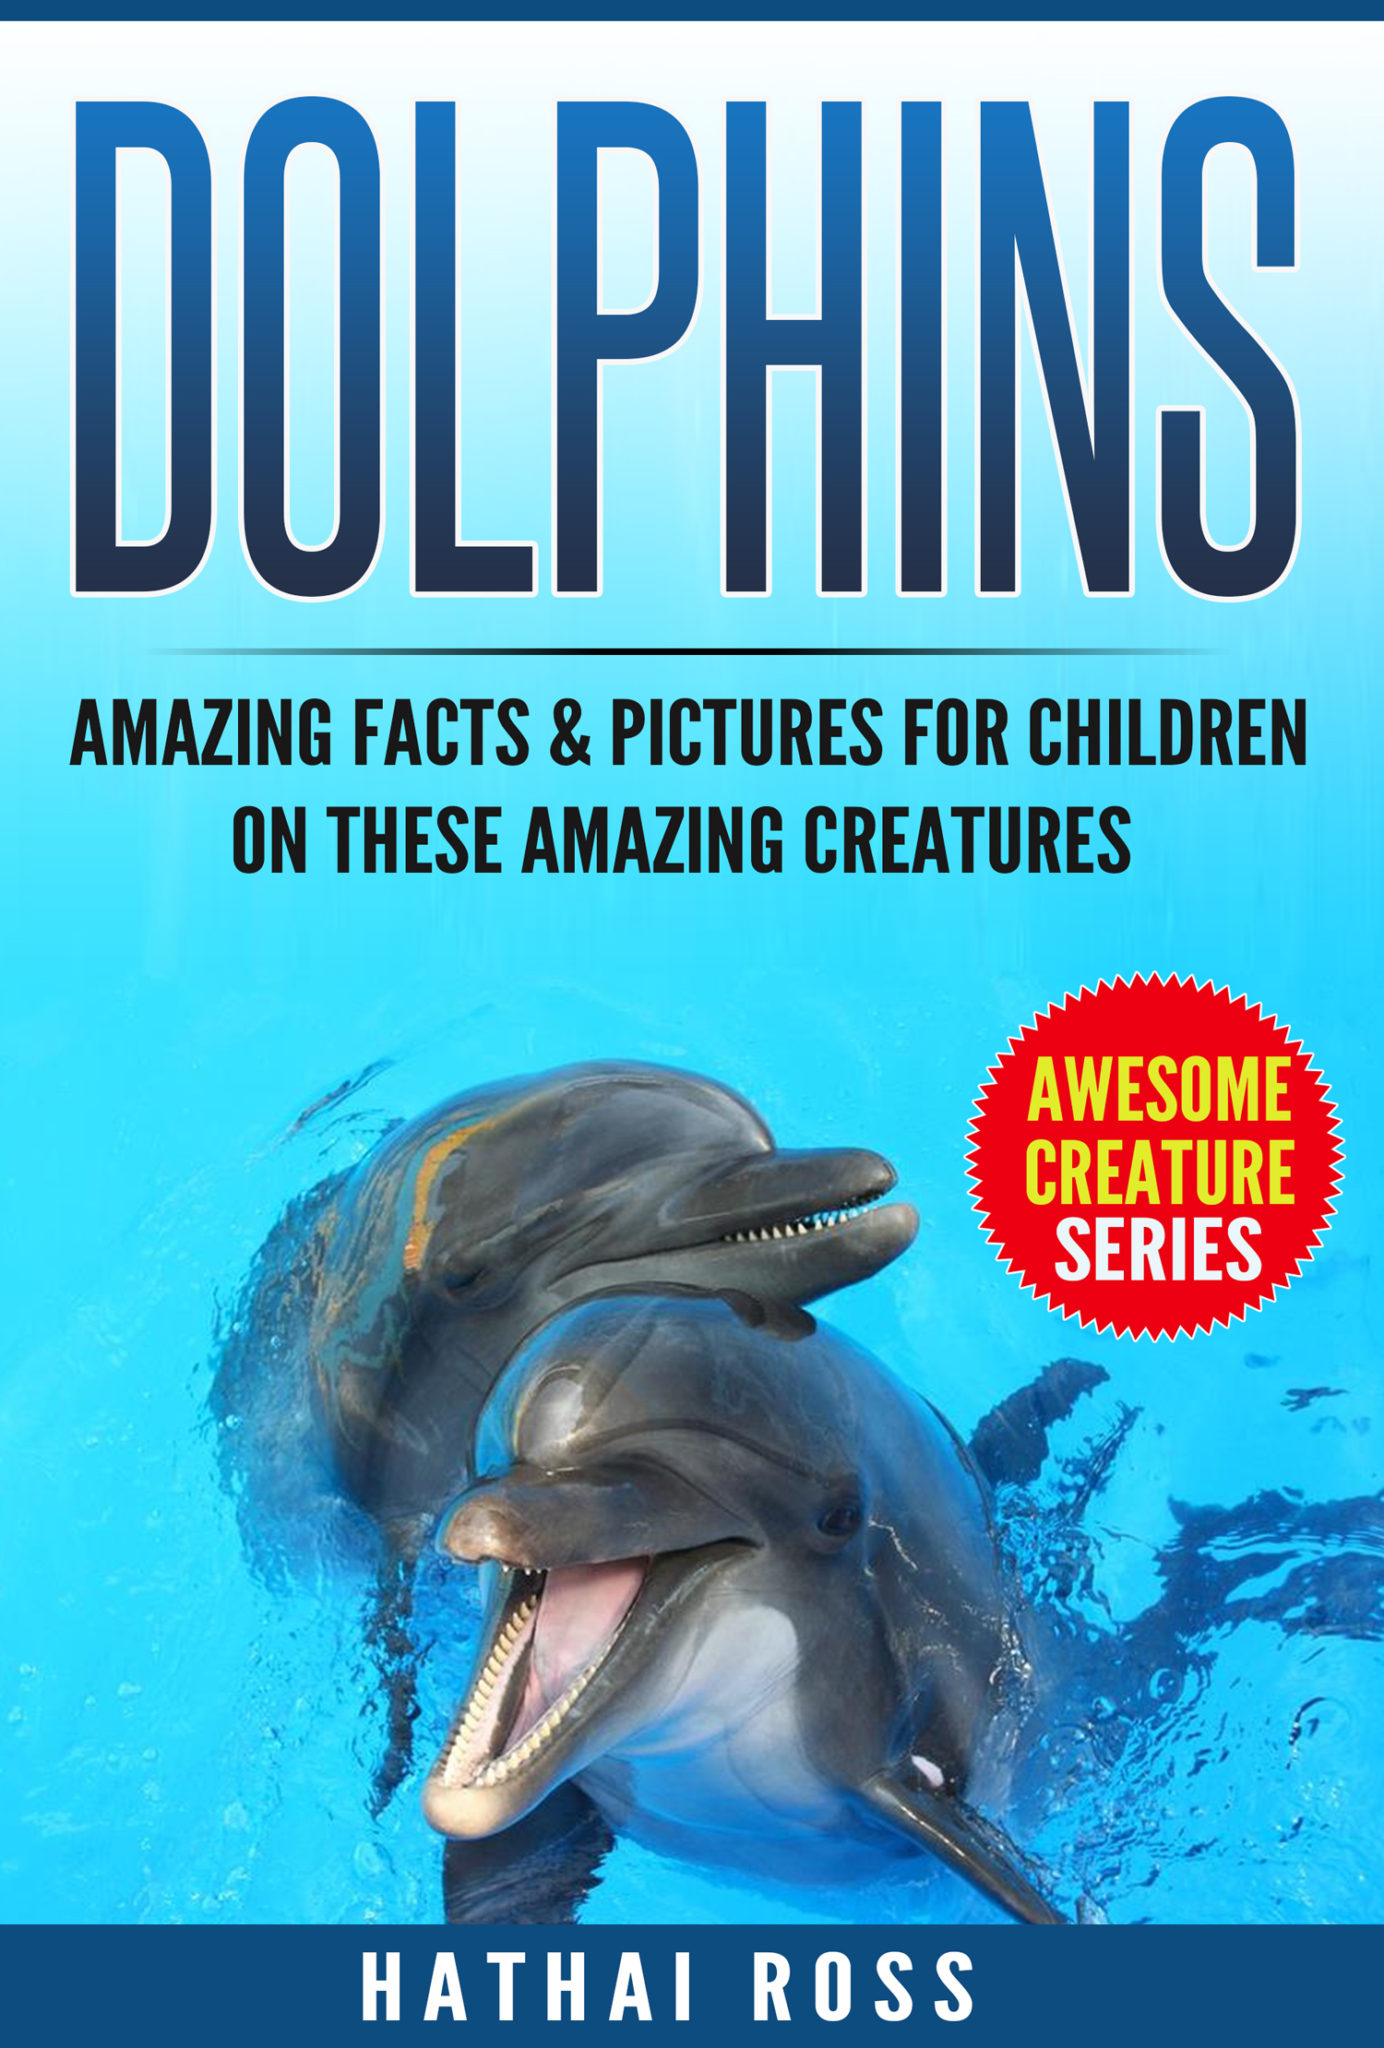 FREE: Dolphins: Amazing Facts & Pictures for Kids on These Amazing Creatures by Hathai Ross